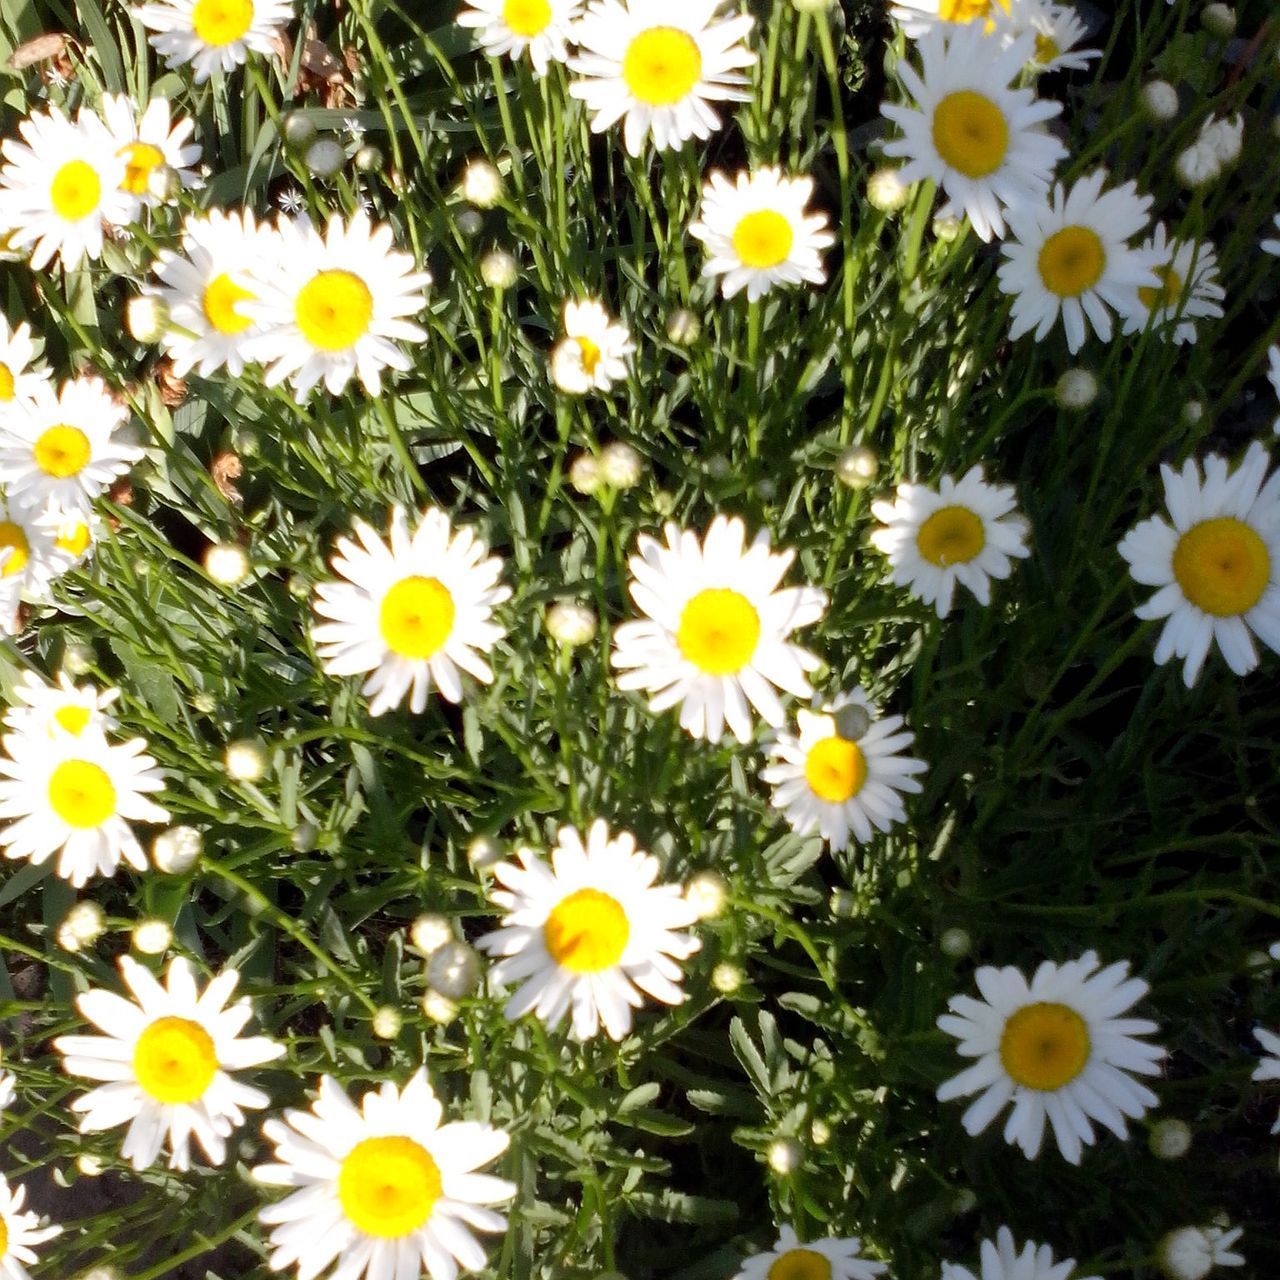 flower, freshness, fragility, petal, daisy, growth, flower head, beauty in nature, yellow, white color, nature, high angle view, blooming, plant, field, pollen, in bloom, abundance, day, close-up